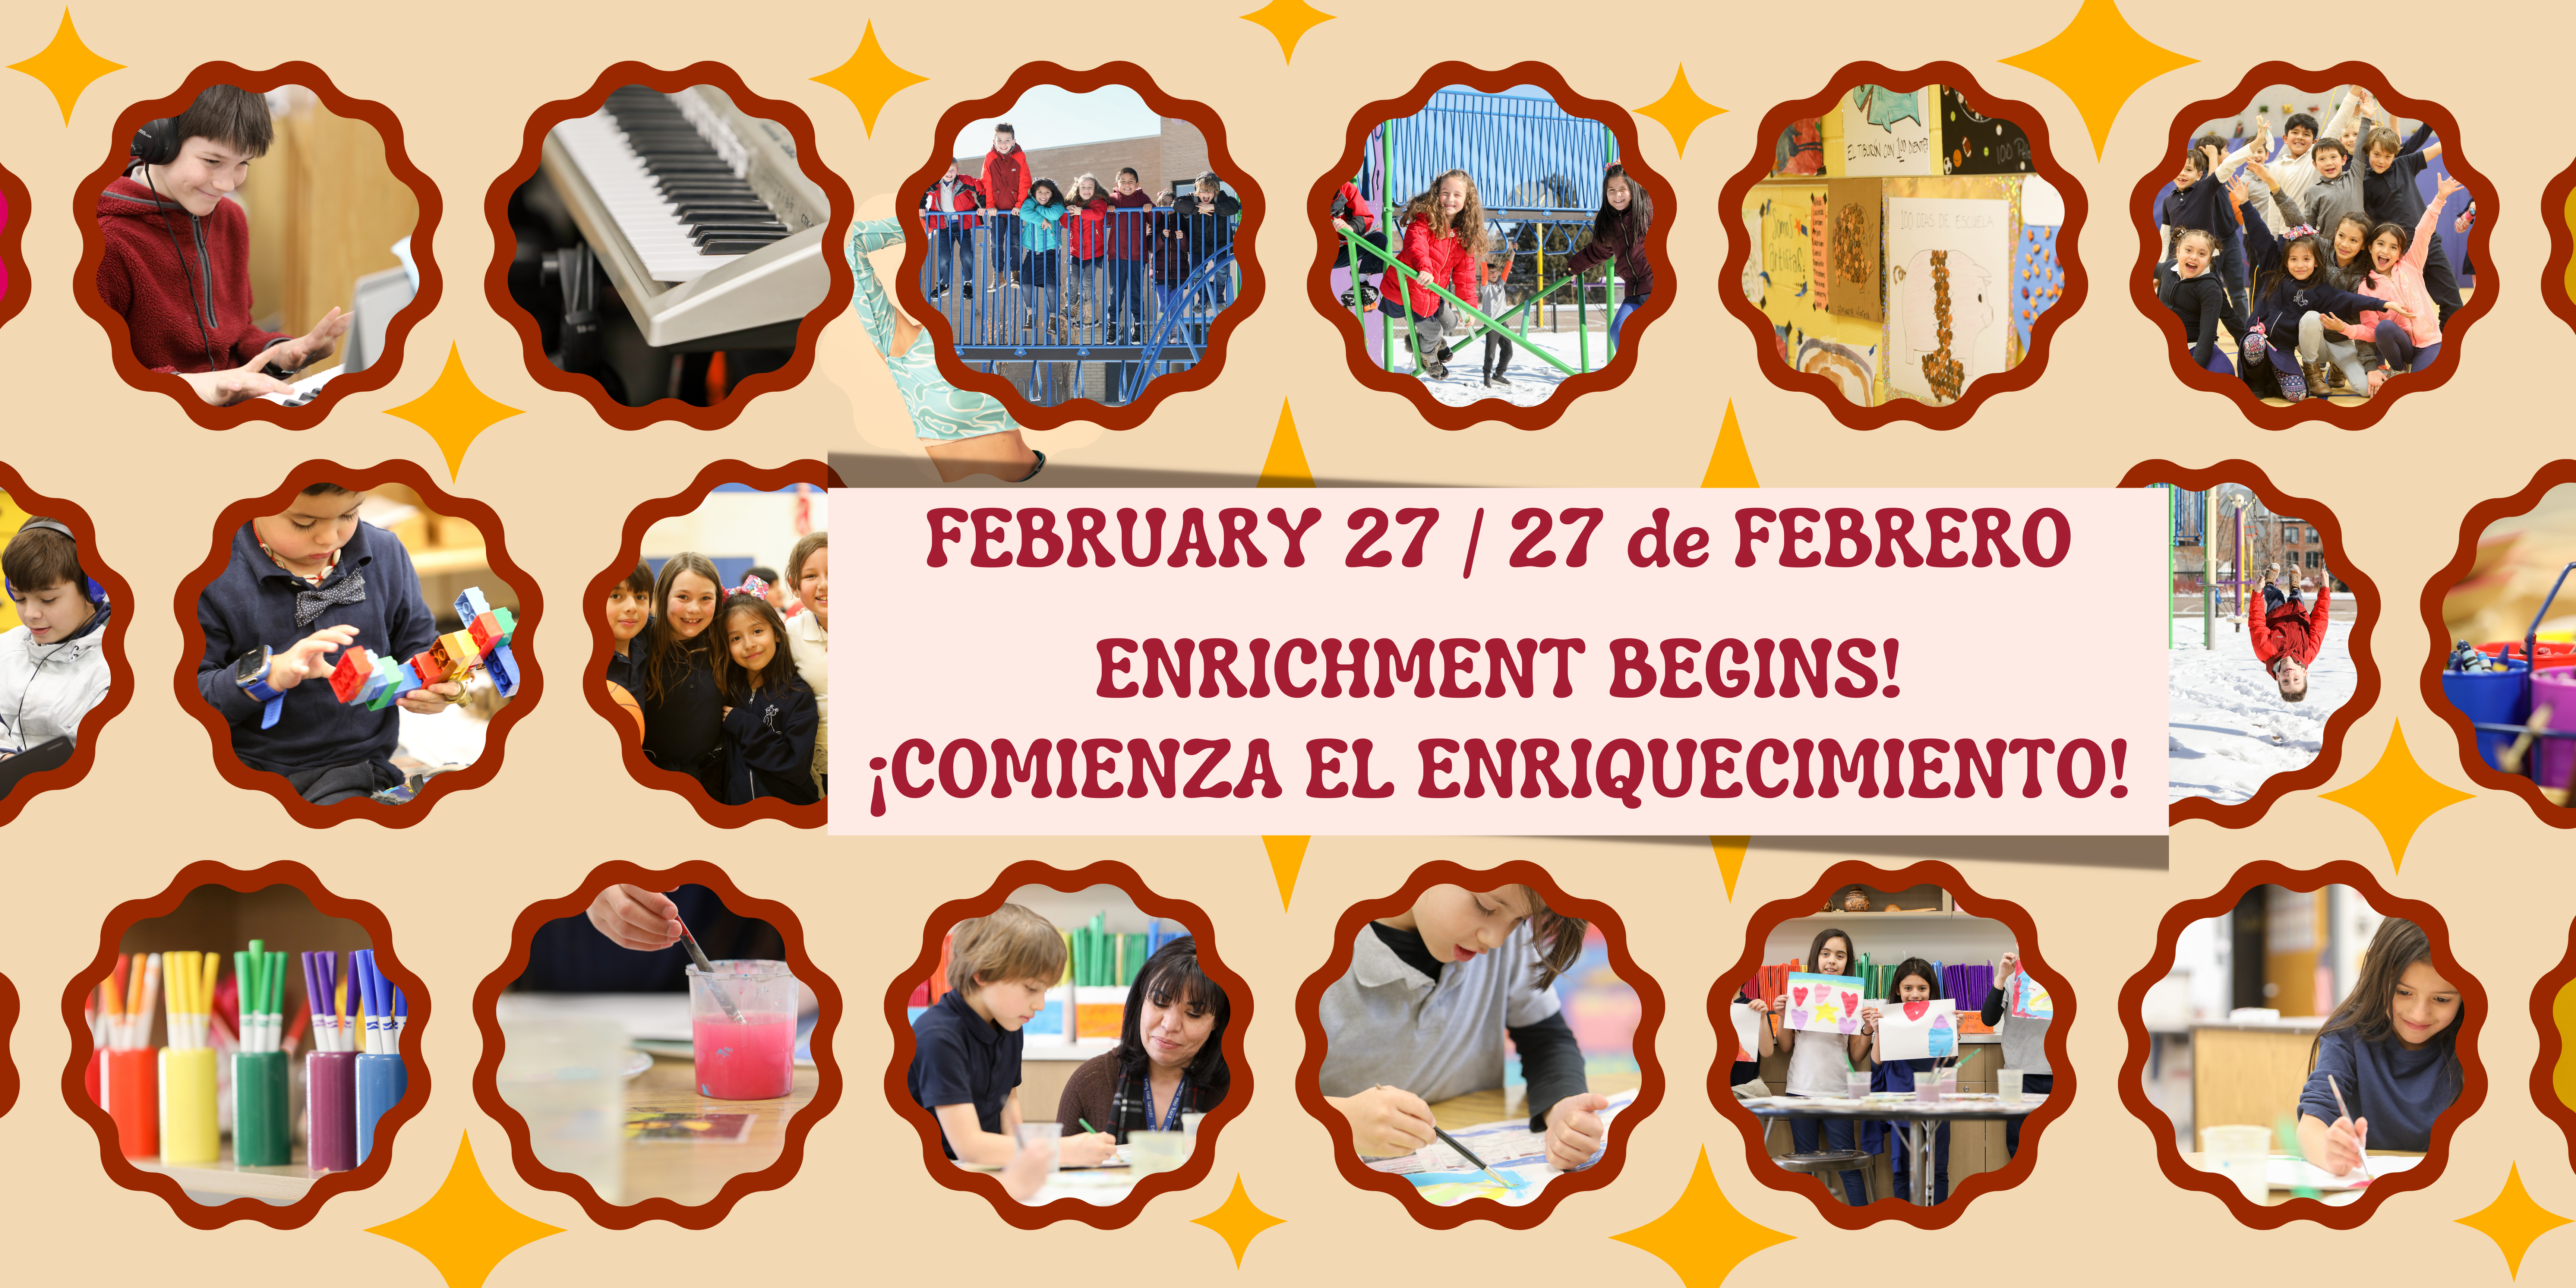 Red text says "February 27 / 27 de Febrero:" and "Enrichment Begins!" and "¡Comienza el Enriquecimiento!" on pale orange background. Images of students making art, playing on the playground, playing piano, playing with legos..